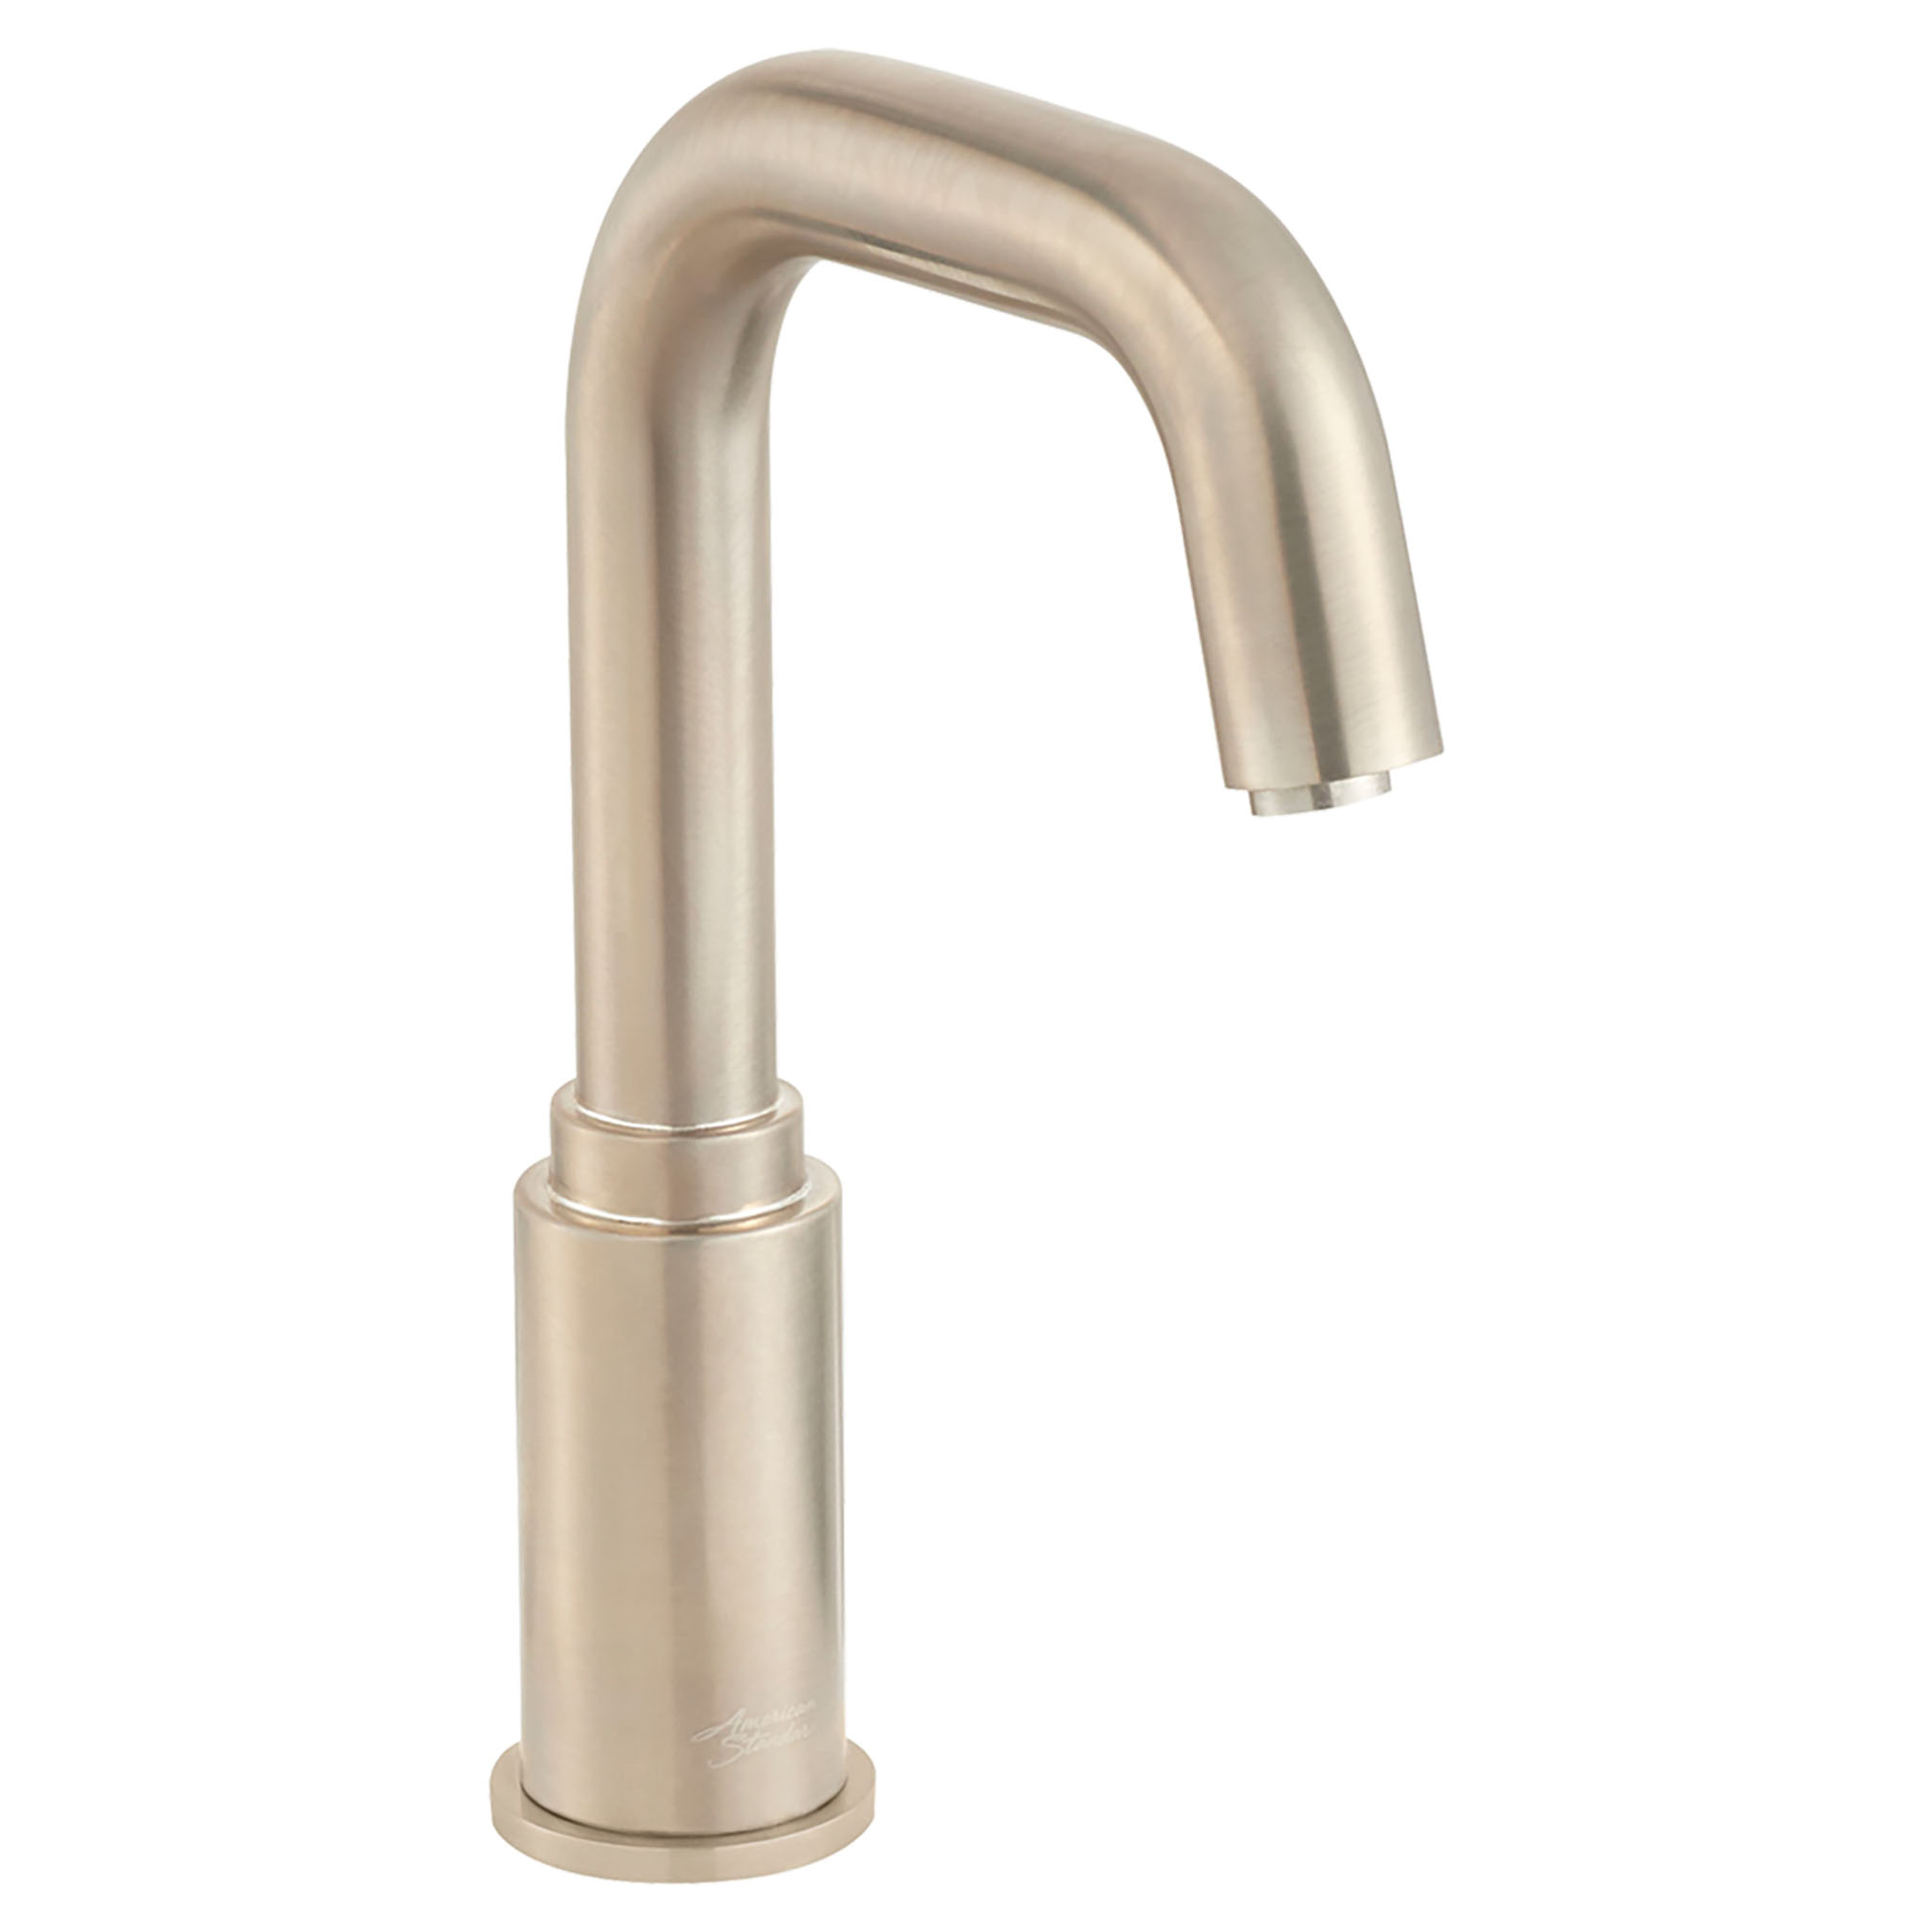 Serin™ Touchless Faucet, Battery-Powered, 0.35 gpm/1.3 Lpm